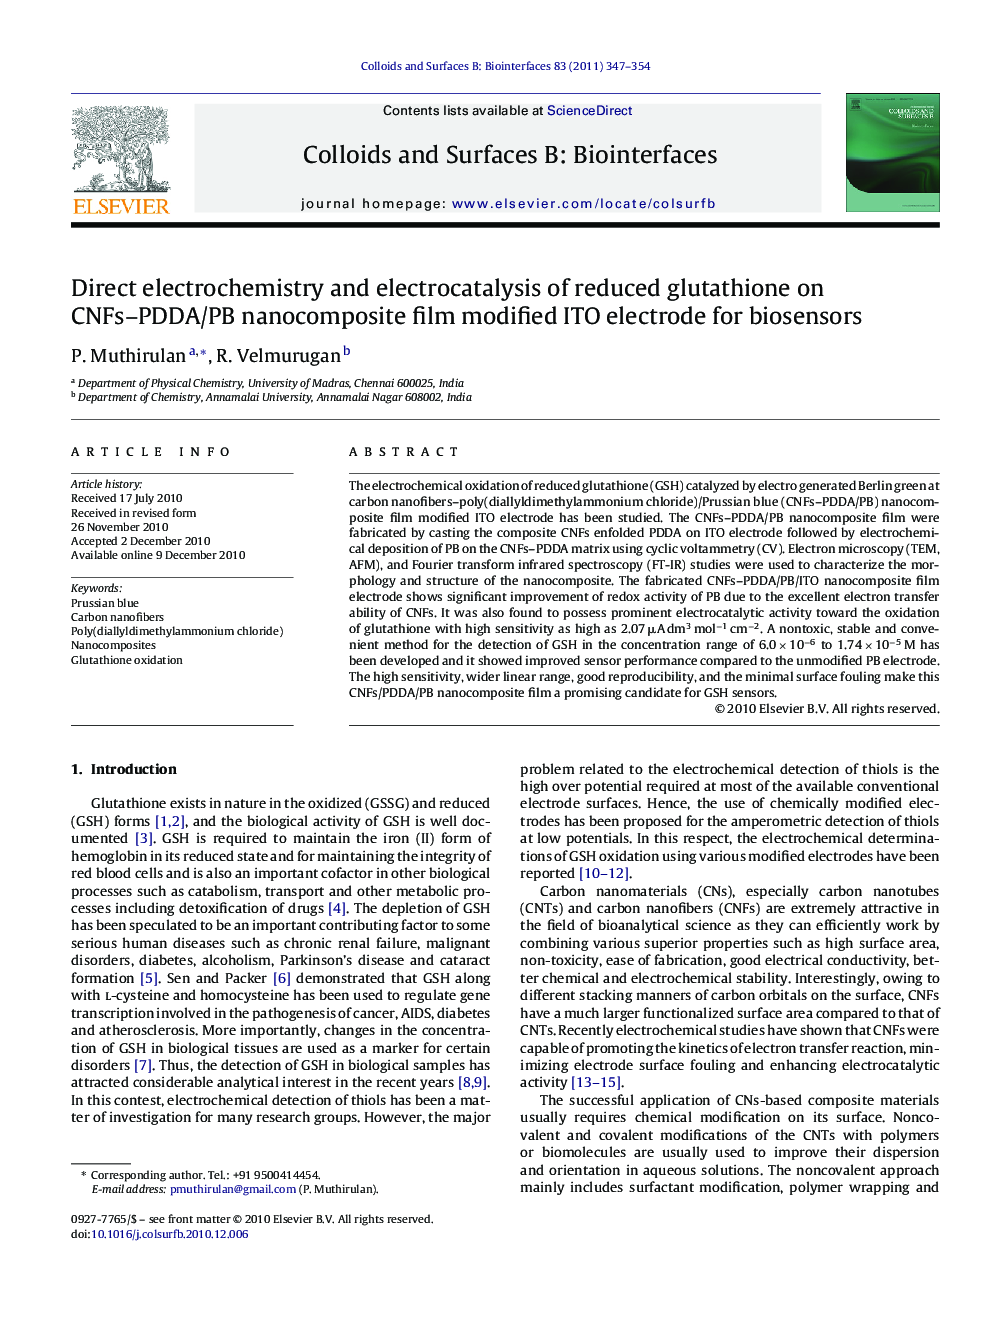 Direct electrochemistry and electrocatalysis of reduced glutathione on CNFs-PDDA/PB nanocomposite film modified ITO electrode for biosensors